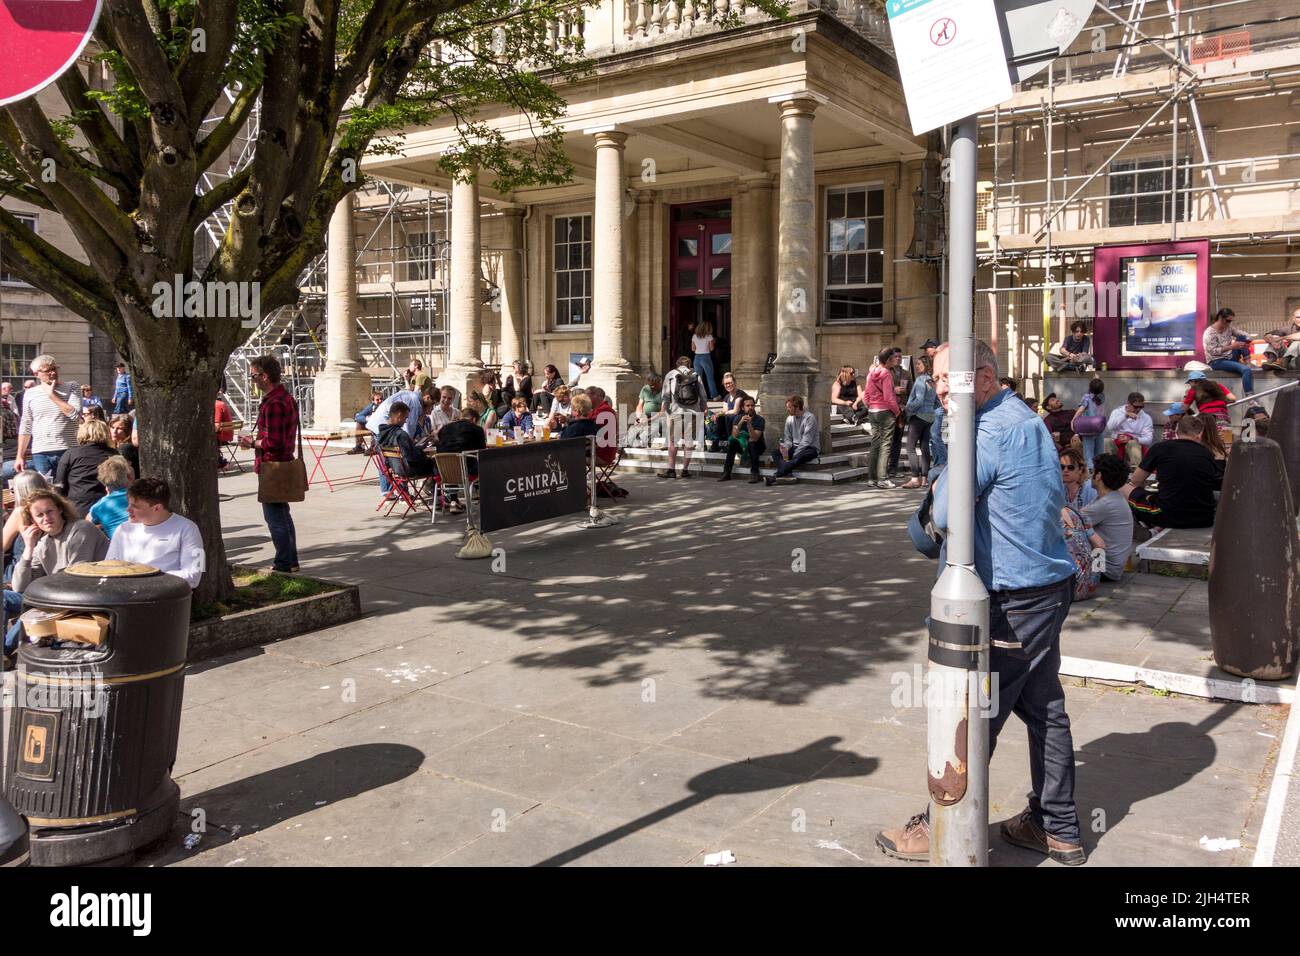 People enjoying sunny day in front of the Subscription Rooms, Stroud, Gloucestershire, UK Stock Photo